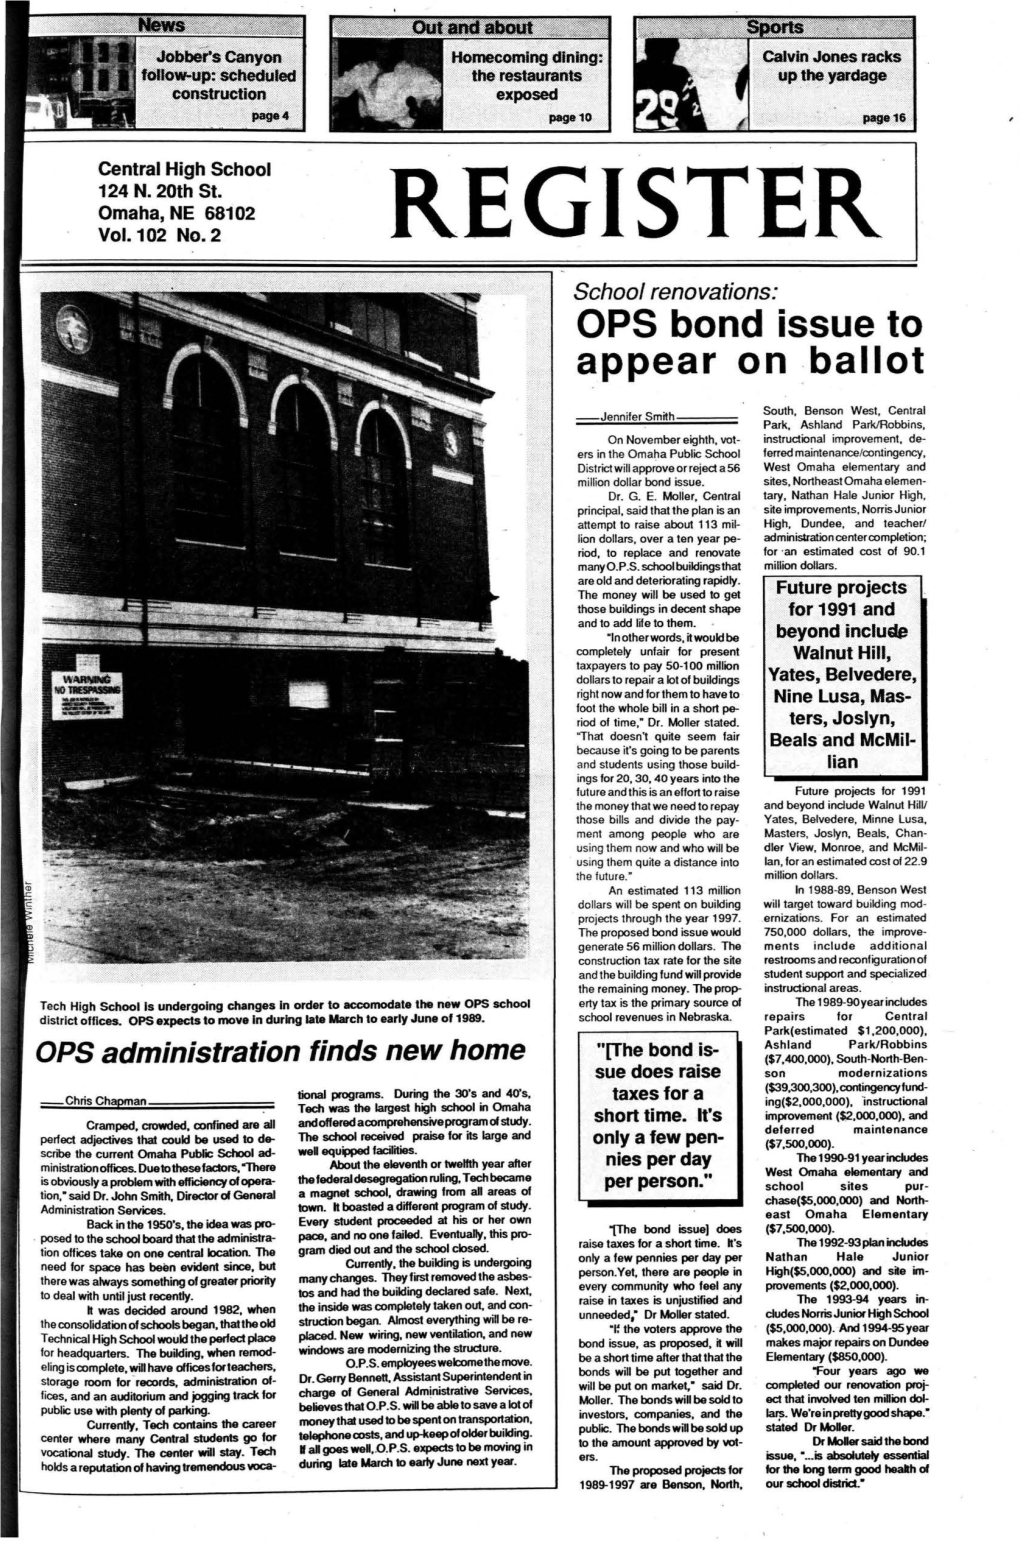 OPS Bond Issue to Appear on Ballot